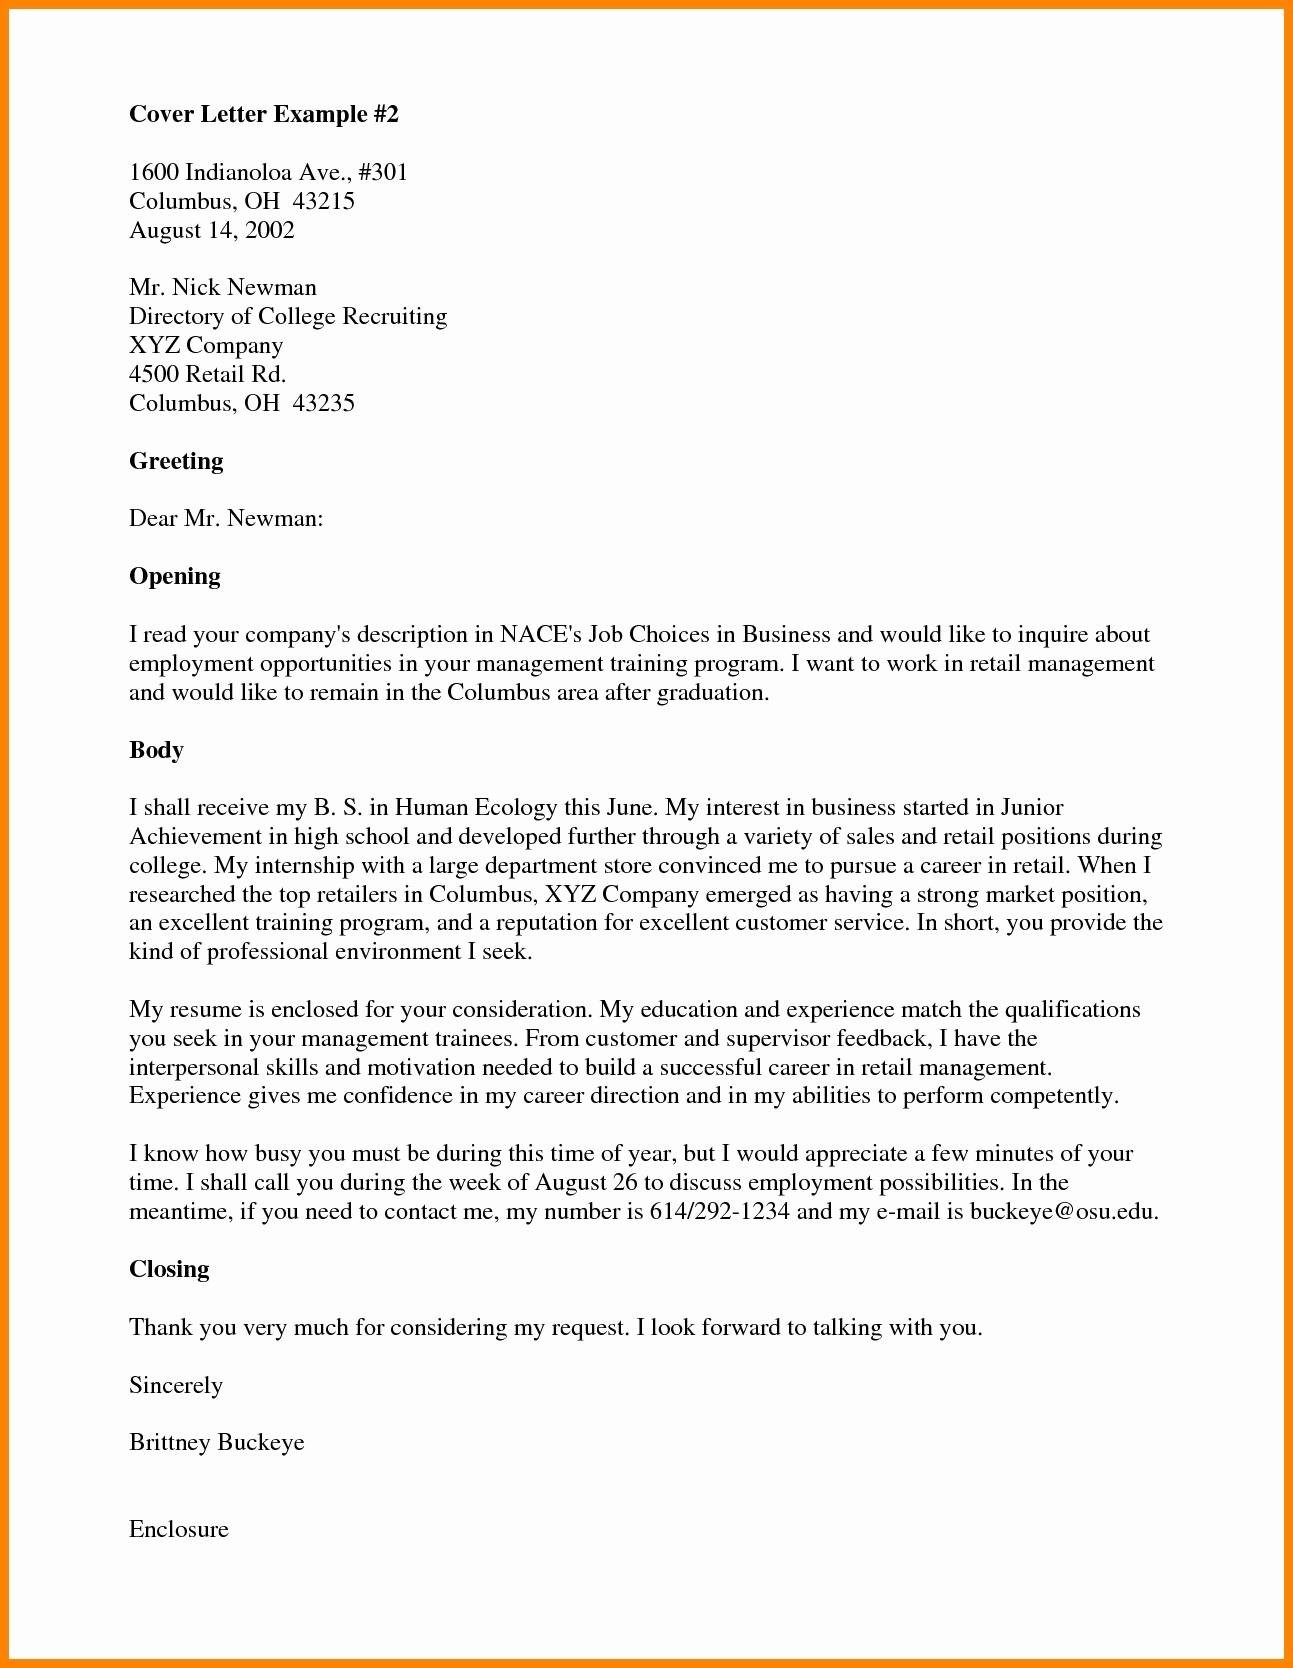 Proper Business Letter Format Greeting Best Of Personal Business 